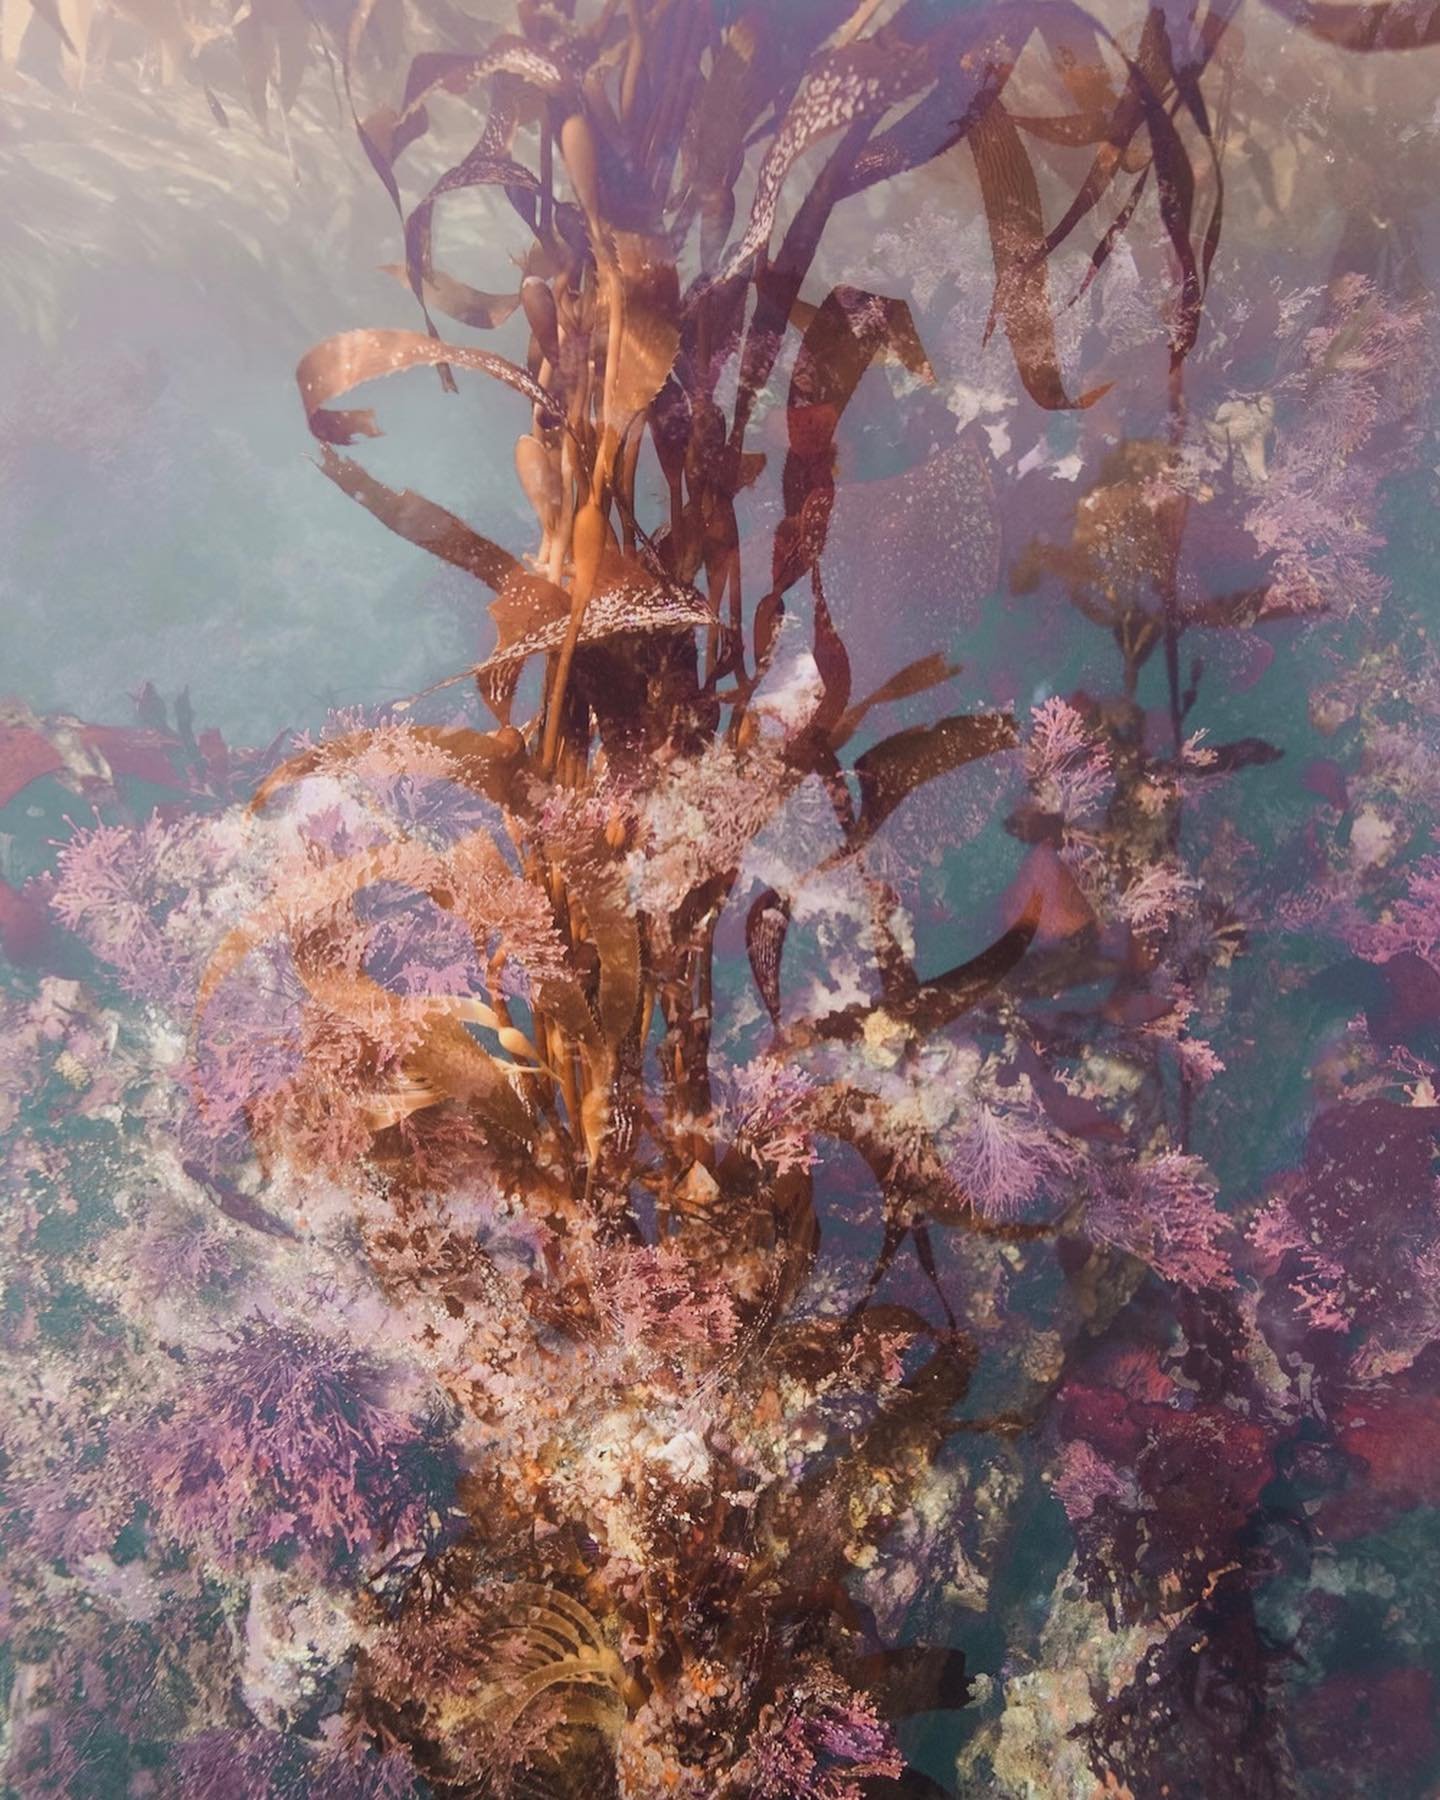 The dreamy palettes of the kelp forests of California were so full of warmth, unlike anything I&rsquo;ve experienced in tropical climates. I love how varied our underwater landscapes can be. Every location has its own colour scheme and decorations, a